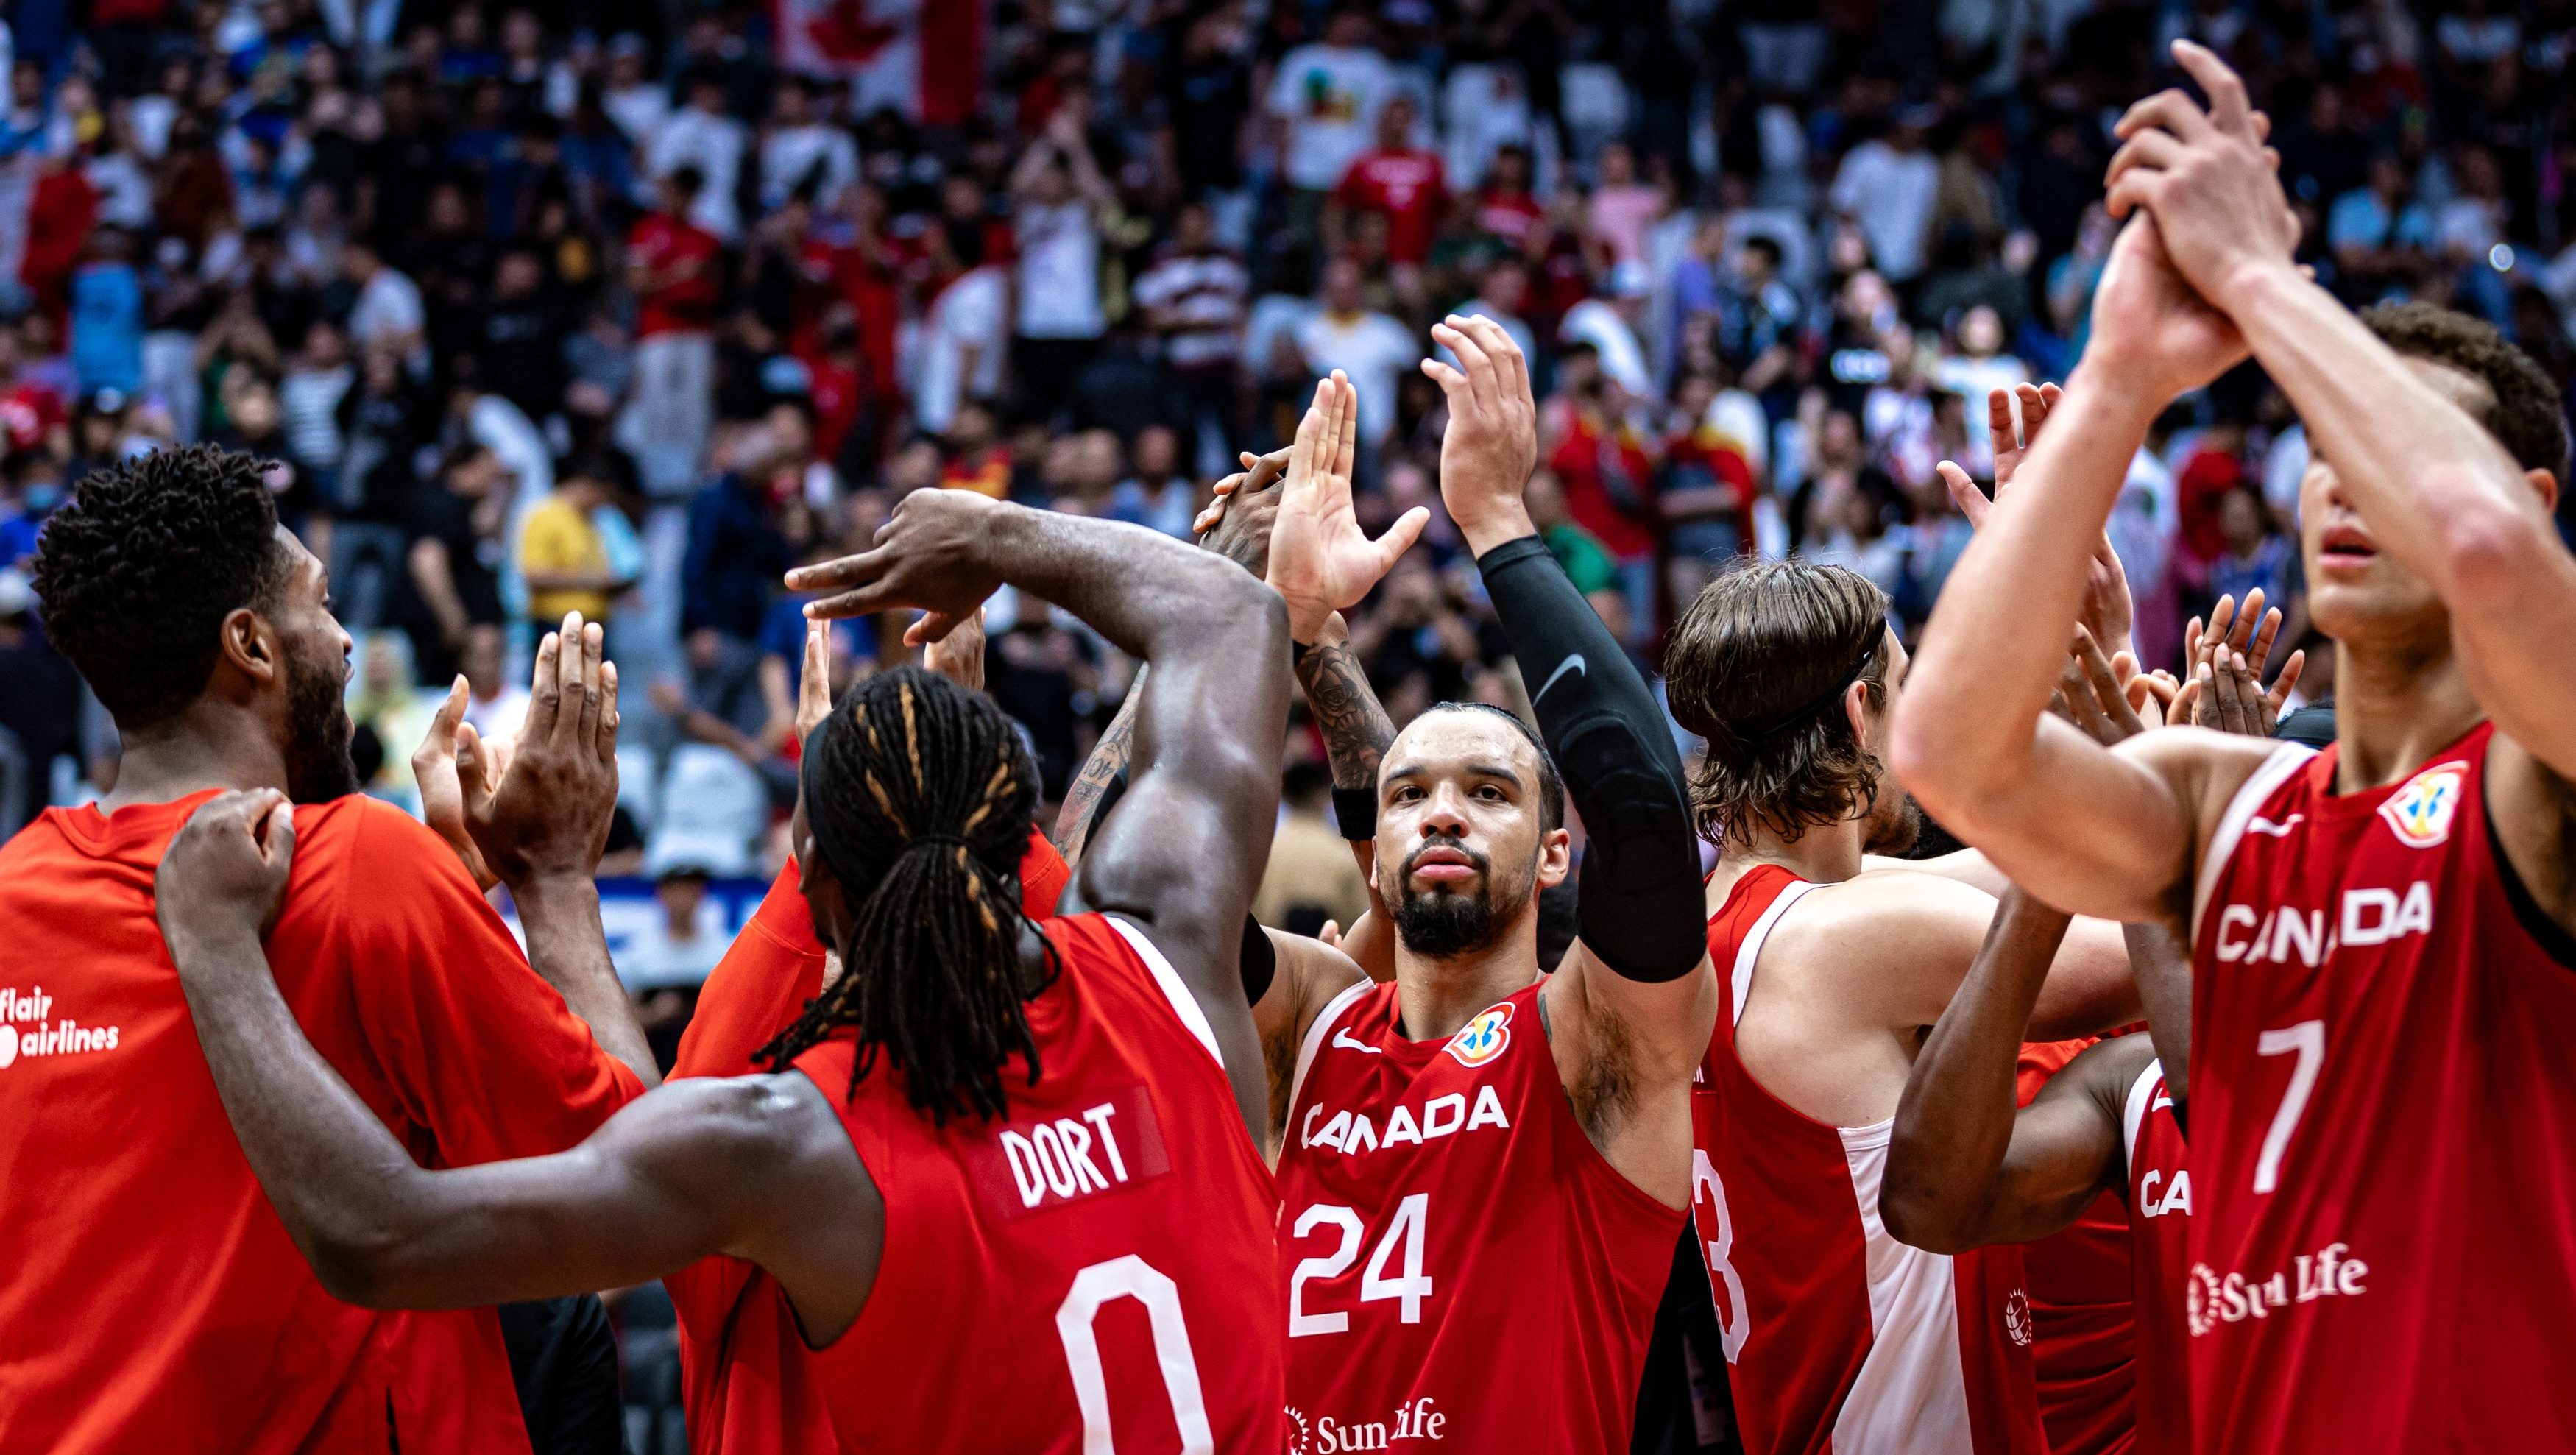 5 takeaways from Team Canada's historic performance at the FIBA